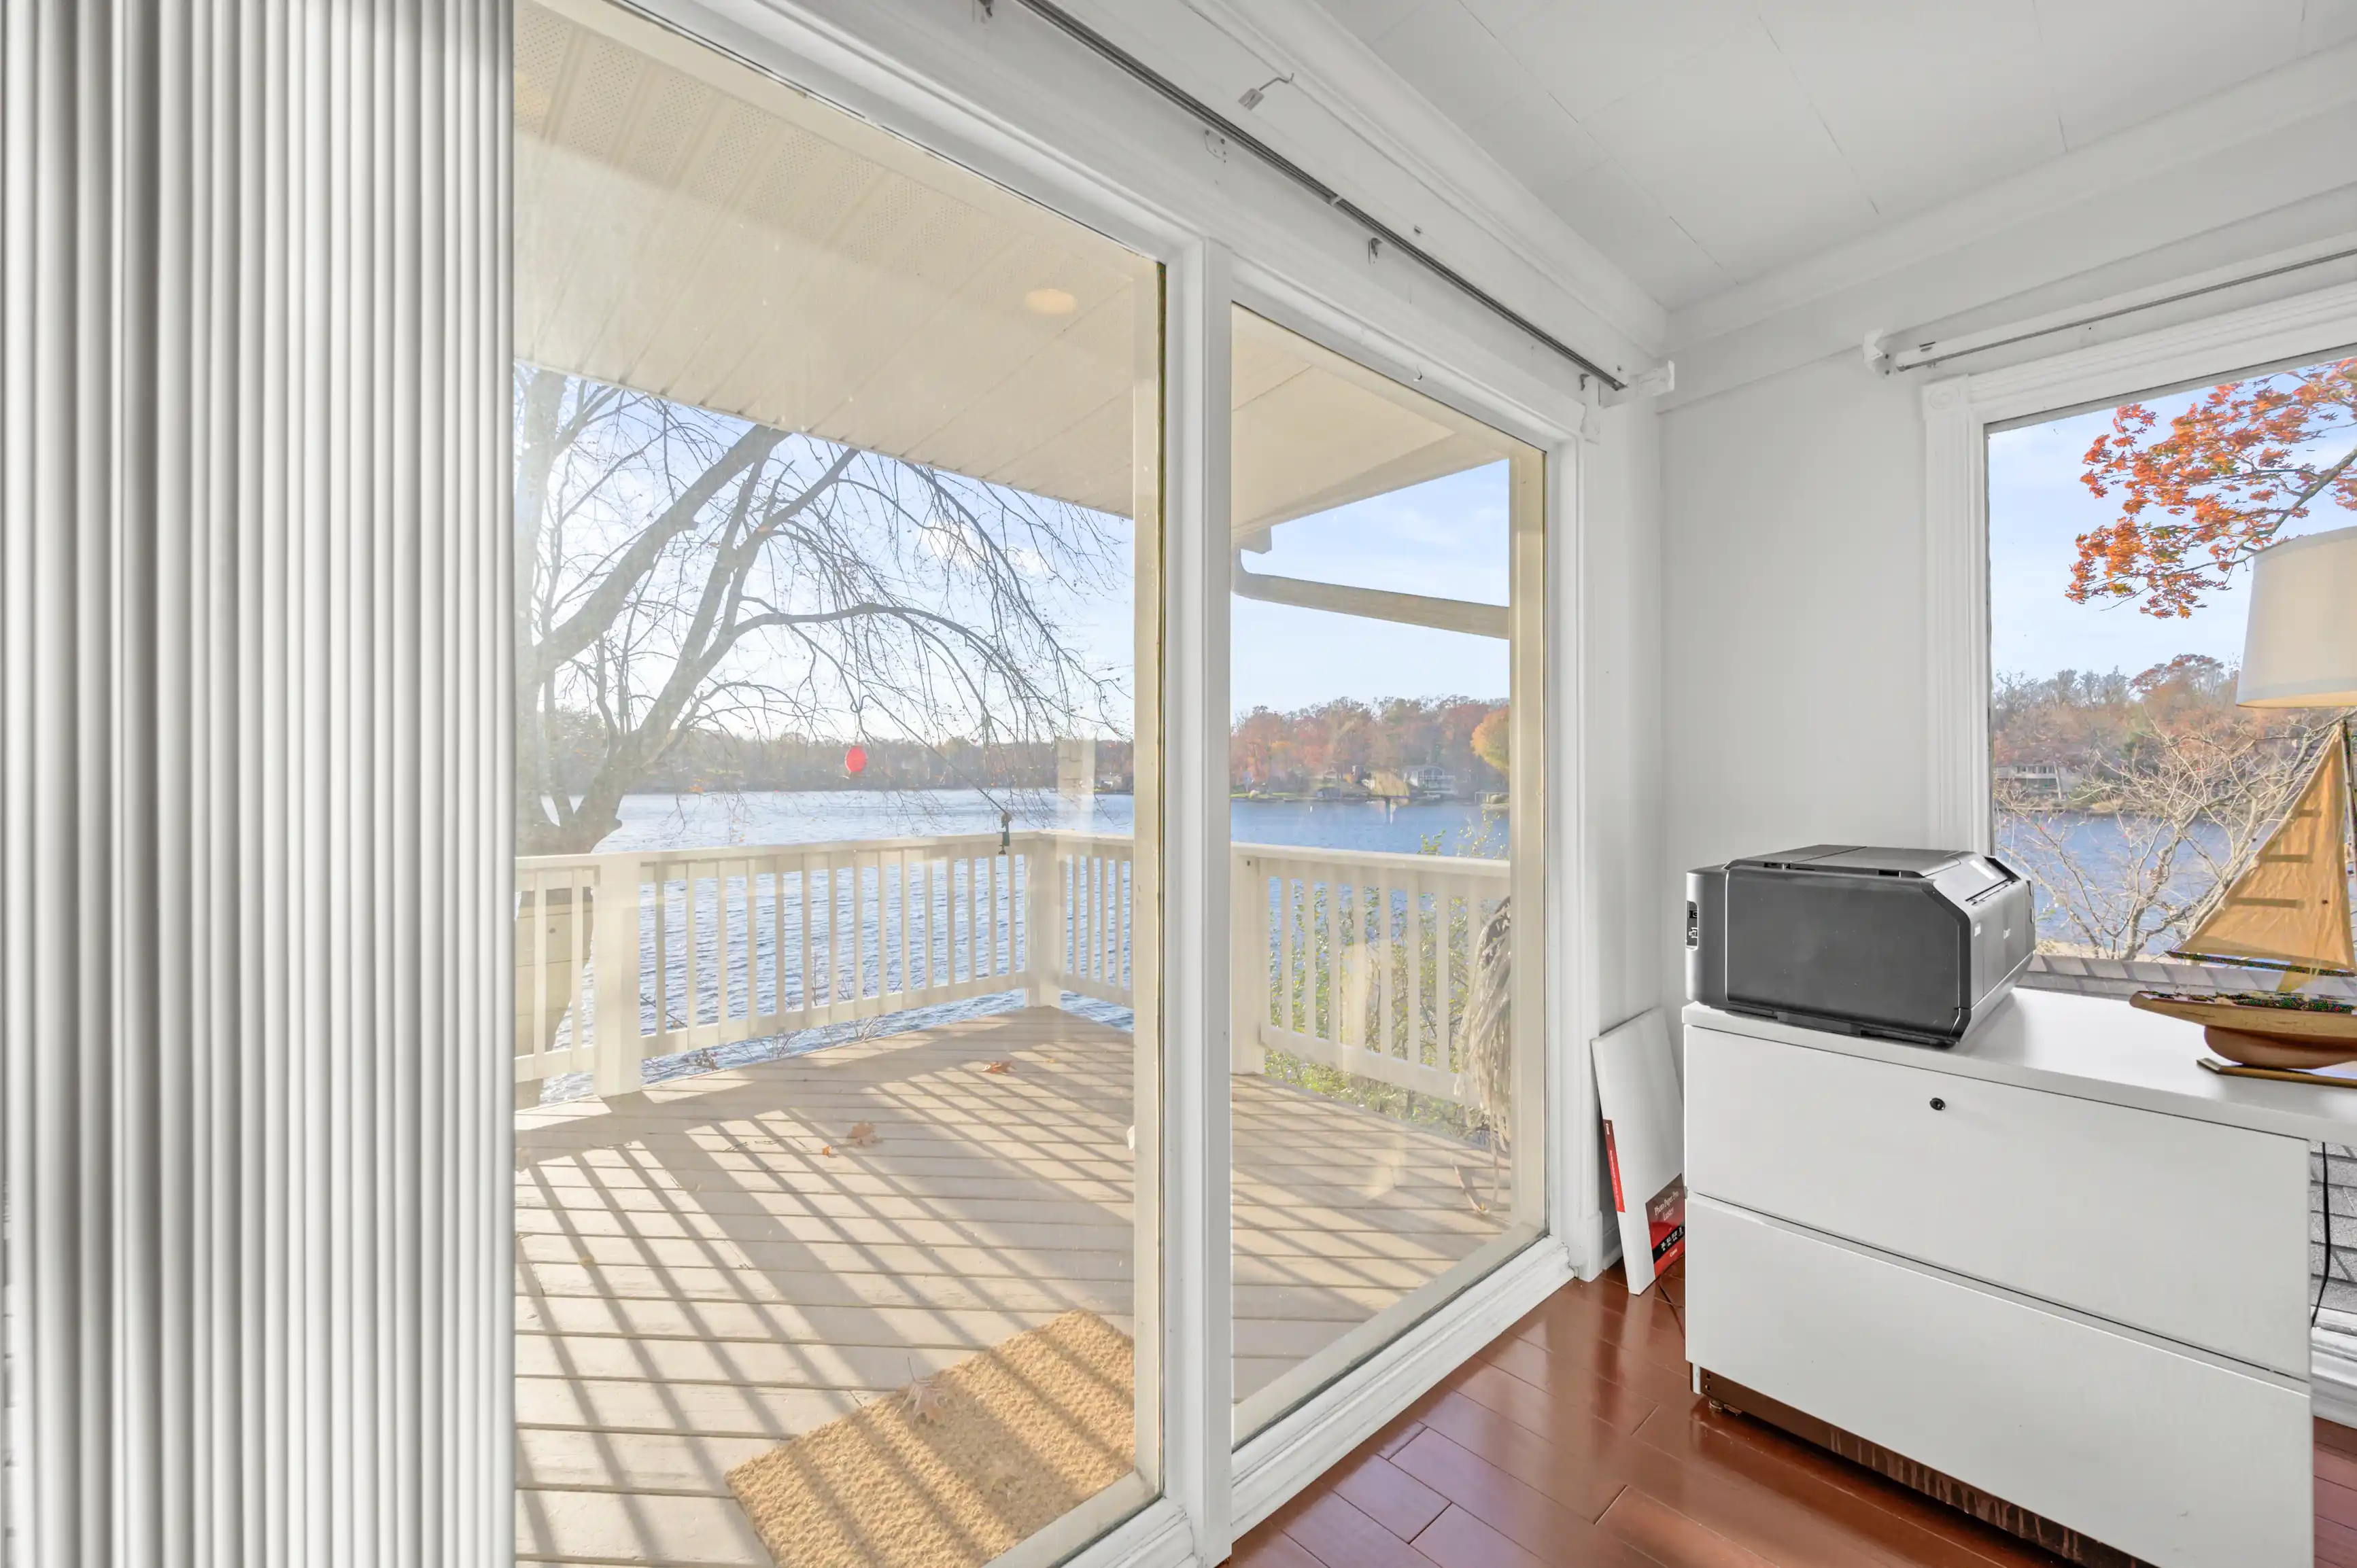 Bright sunlit room with open sliding doors leading to a deck overlooking a lake, with autumn trees in the distance.